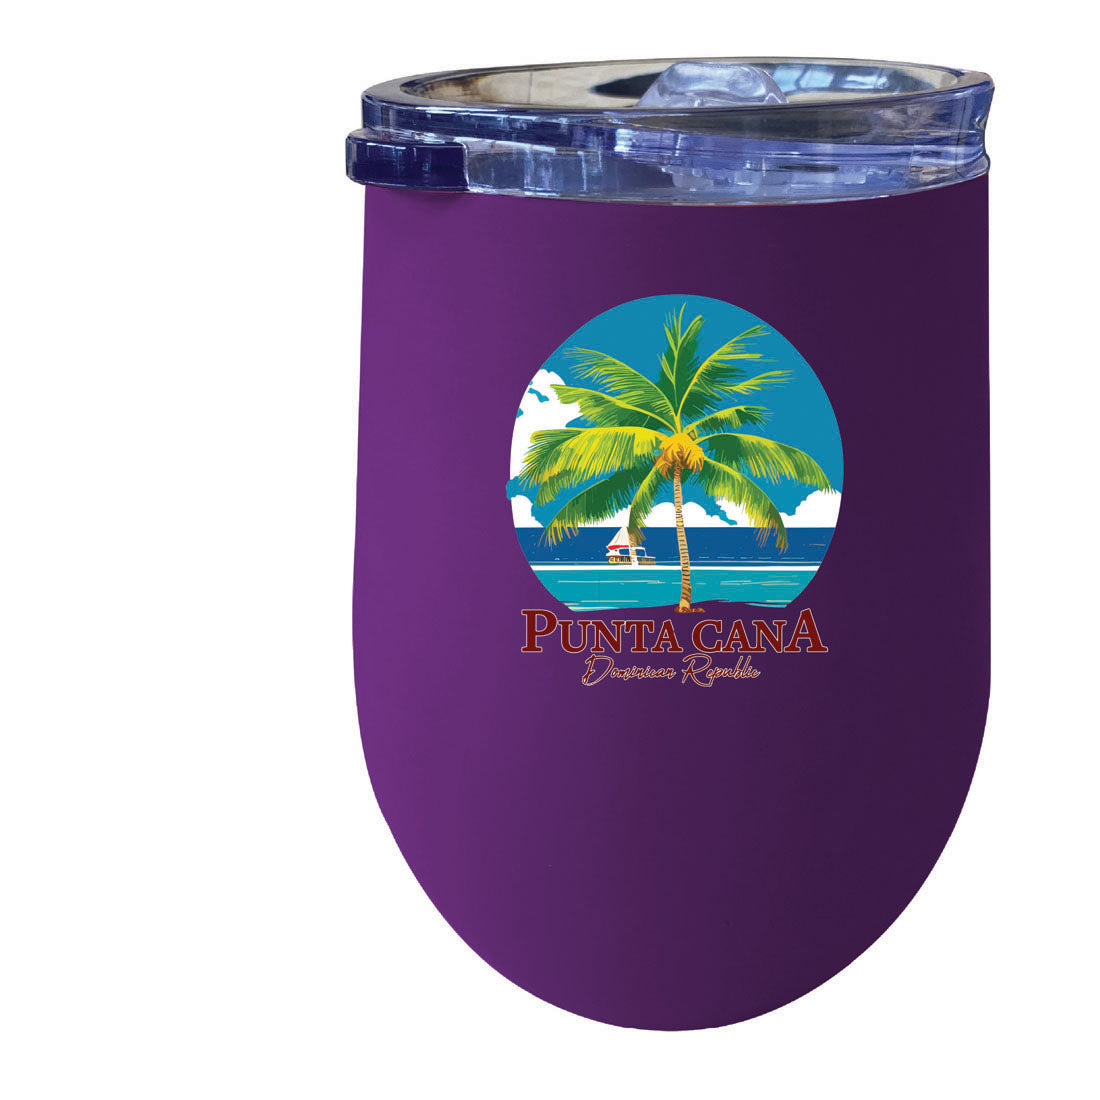 Punta Cana Dominican Republic Souvenir 12 Oz Insulated Wine Stainless Steel Tumbler - Black, PALM